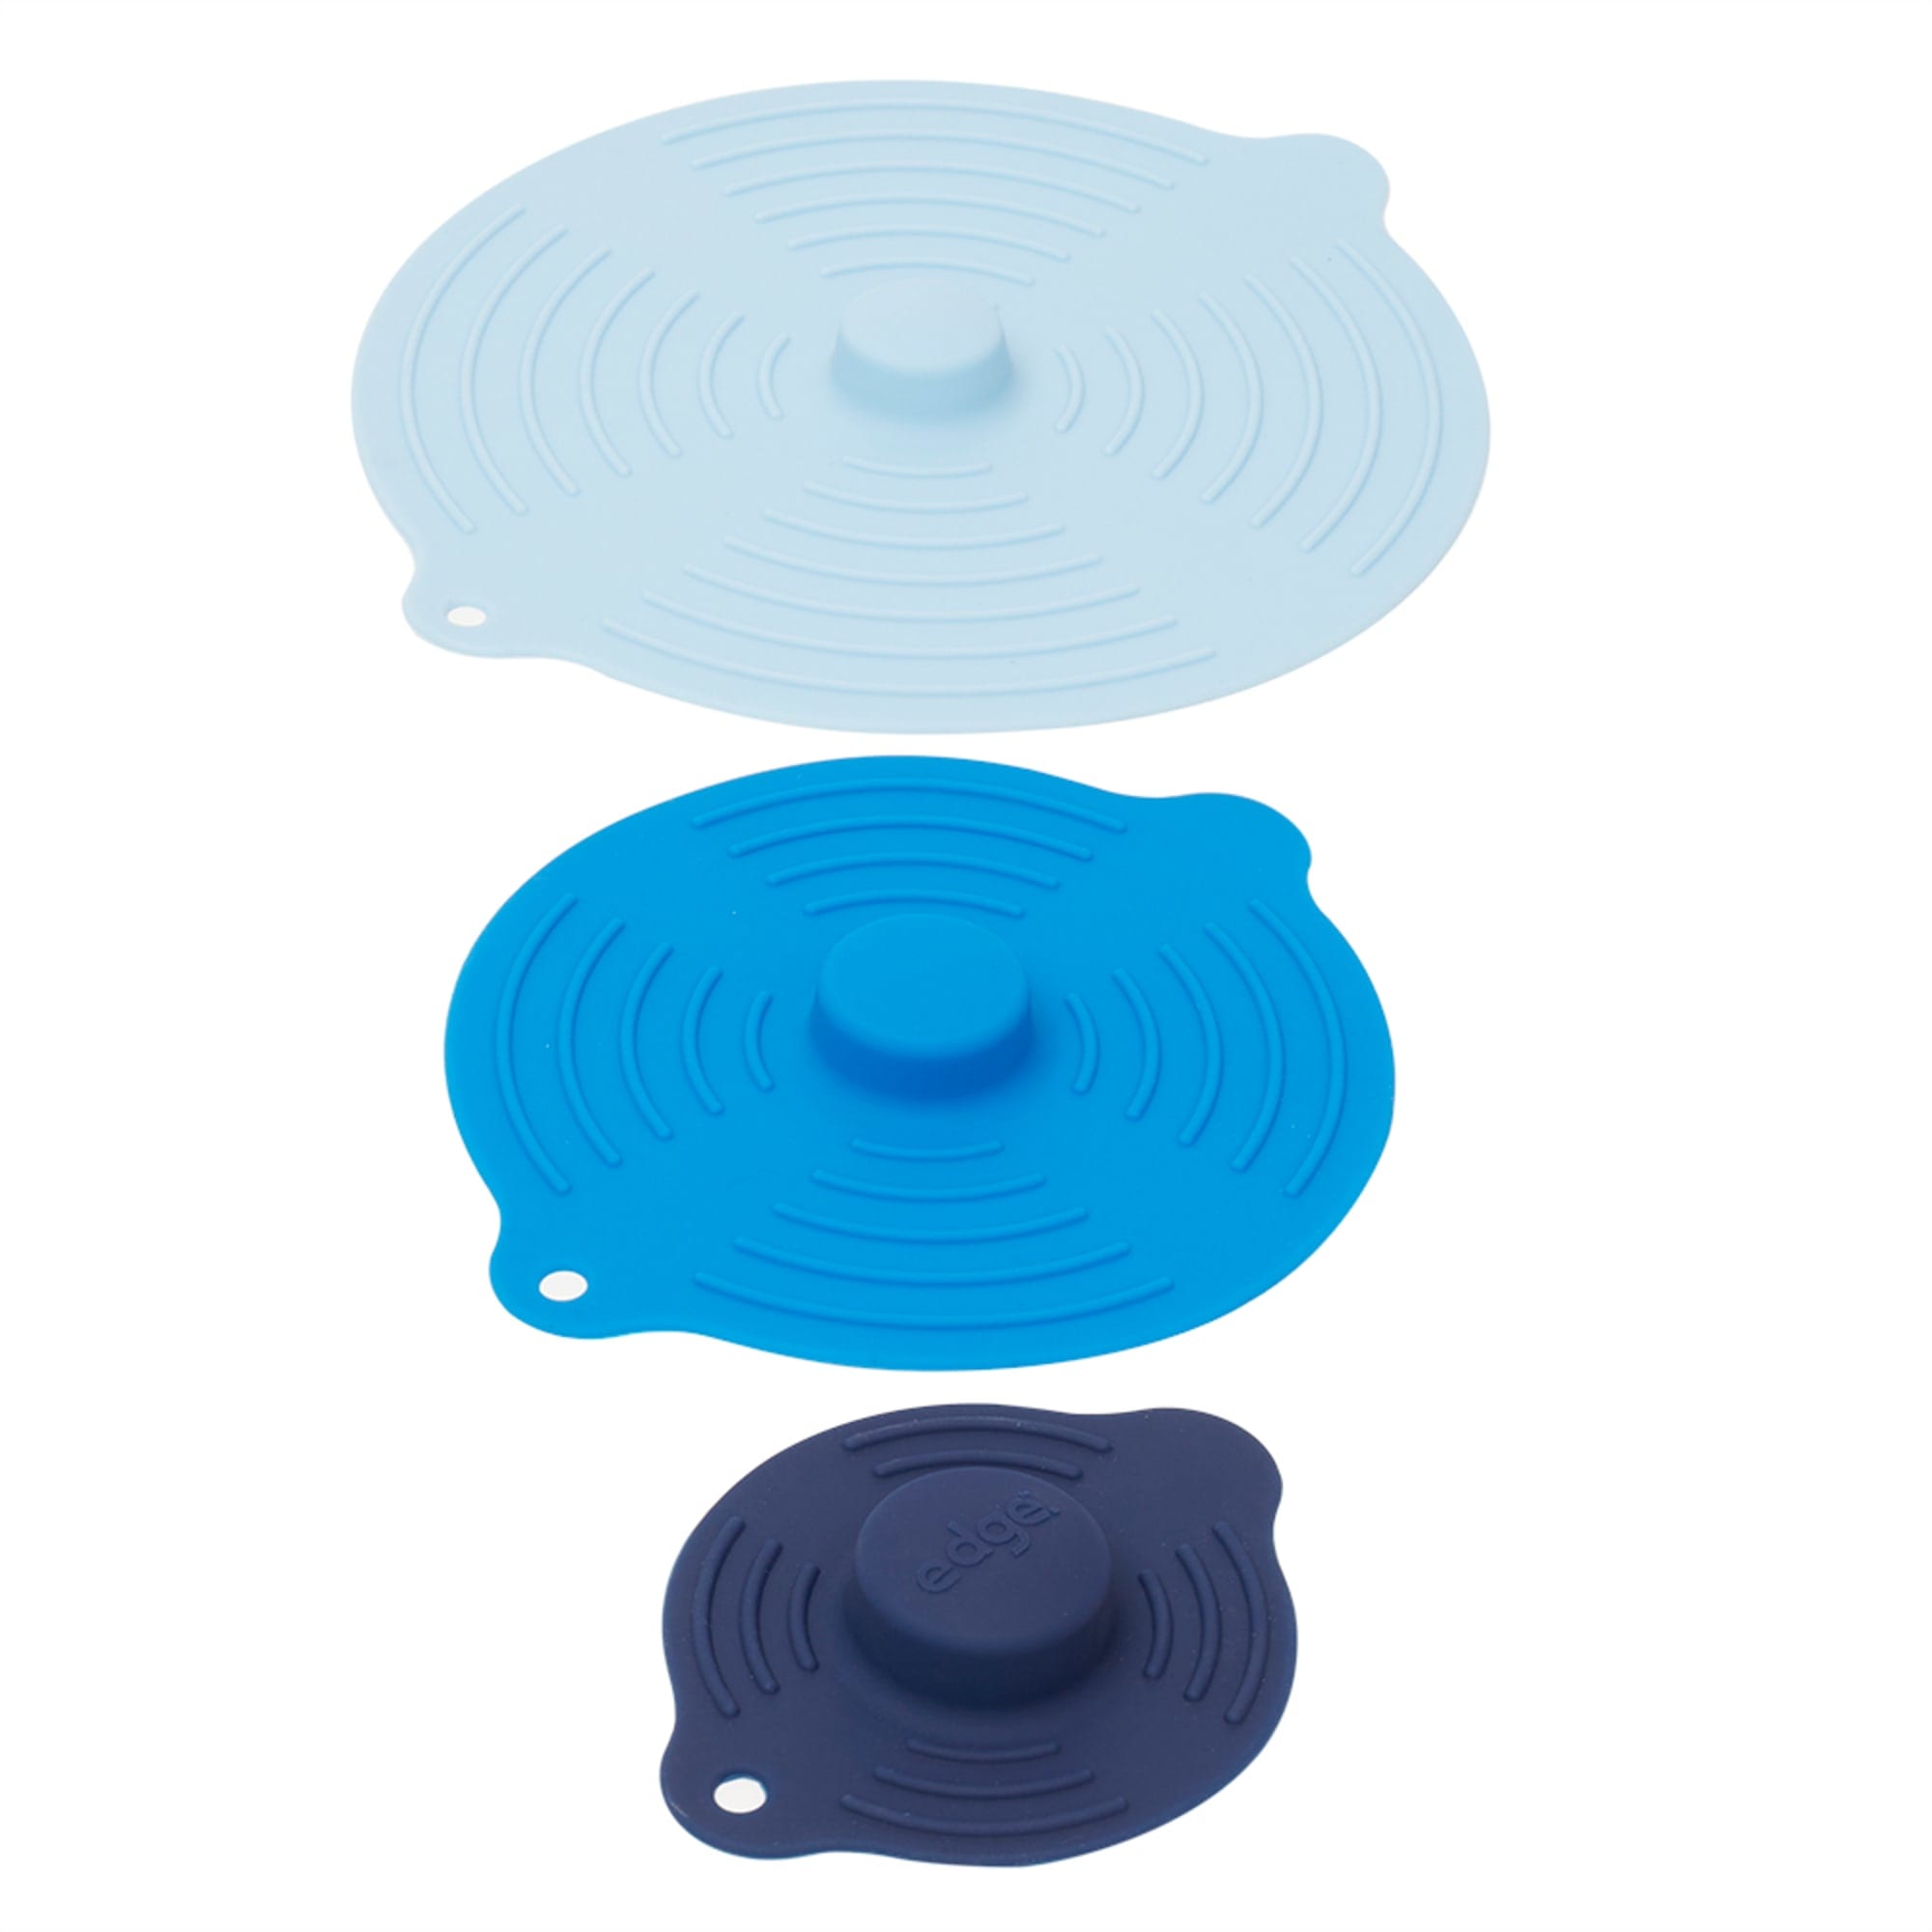 Home Basics Silicone Lids $6.00 EACH, CASE PACK OF 12